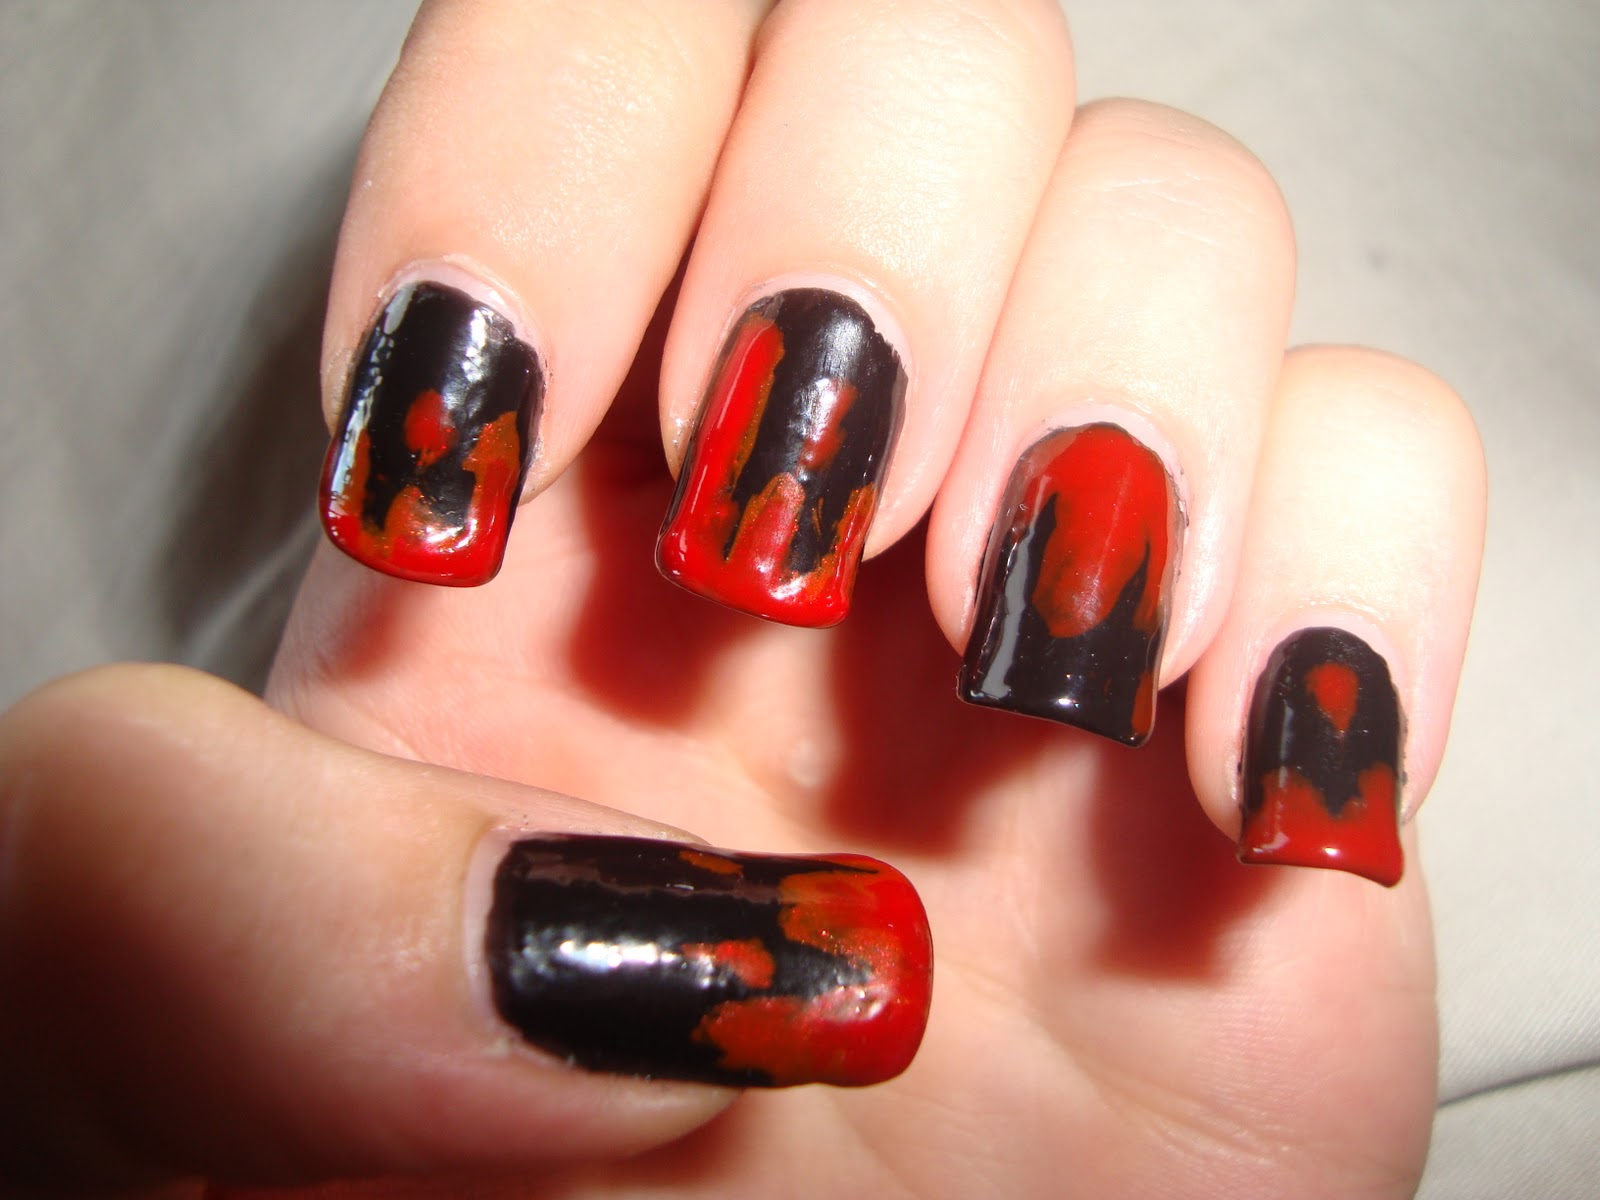 Scribbling With Polish: Bloody nails